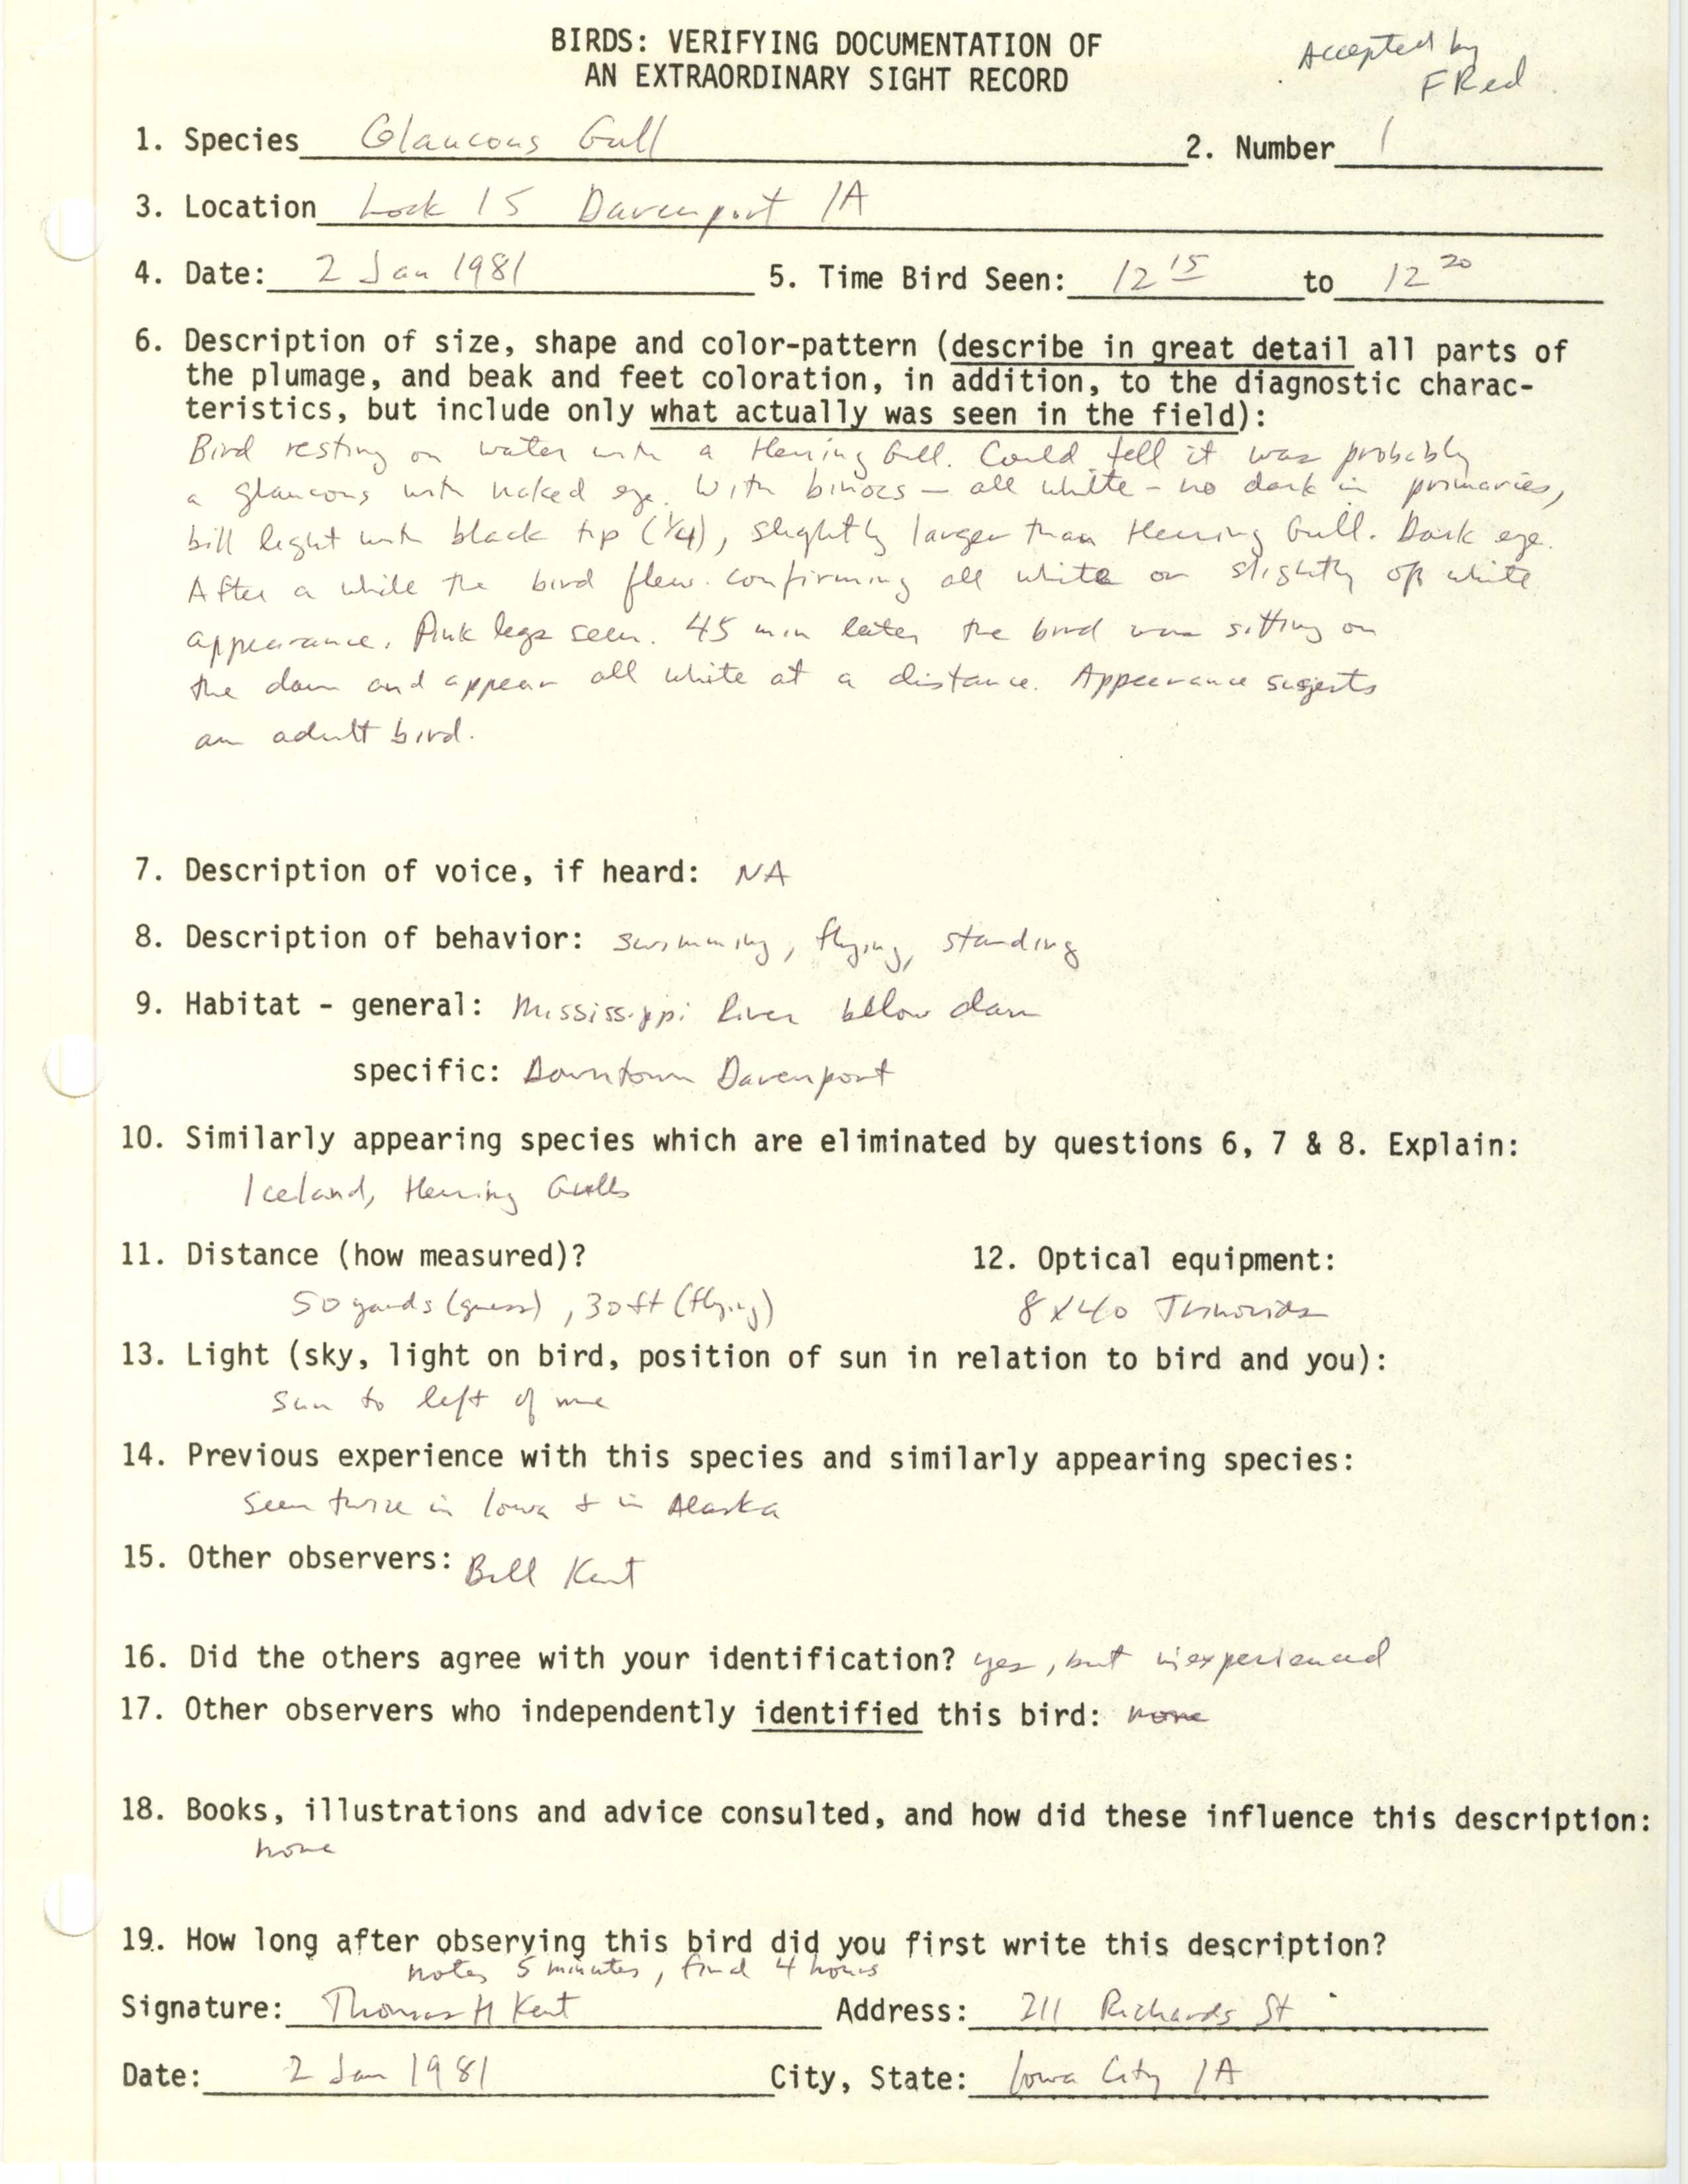 Rare bird documentation form for Glaucous Gull at Lock and Dam 15 at Davenport, 1981